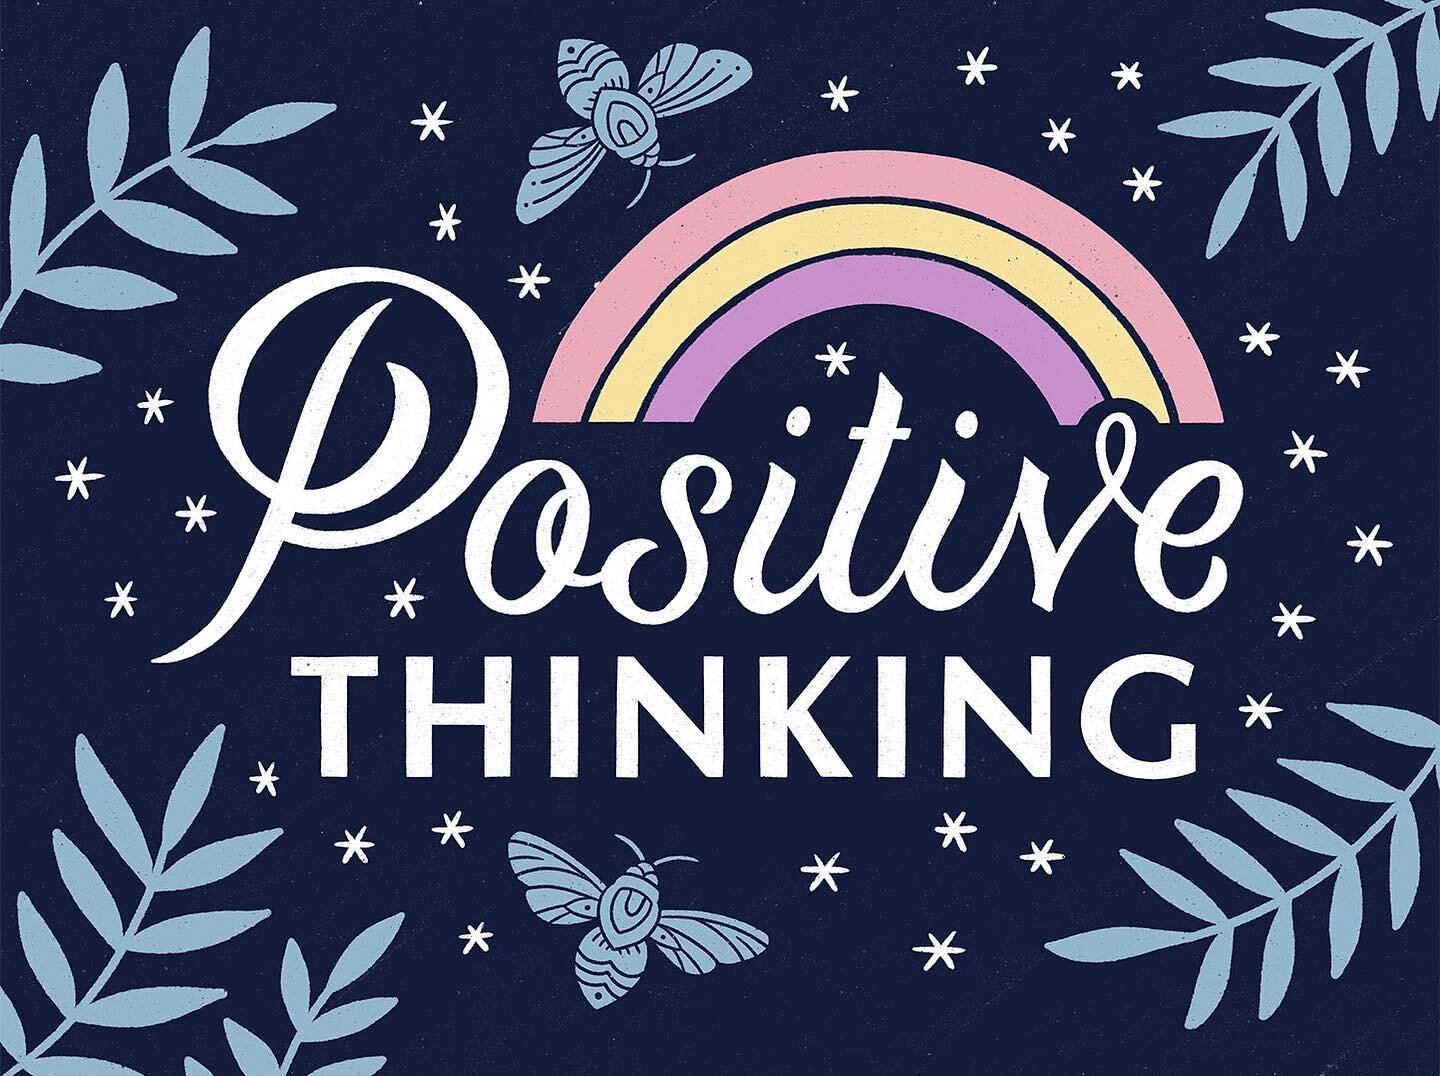 ✨Positive Thinking✨
.
.
.
This is the May theme for @readbrightly and it feels apt. I added a rainbow and a little color for an extra boost. Hope you&rsquo;re all staying safe (and sane)! 🌈
.
.
.
#handlettering #lettering #handlettered #readbrightly